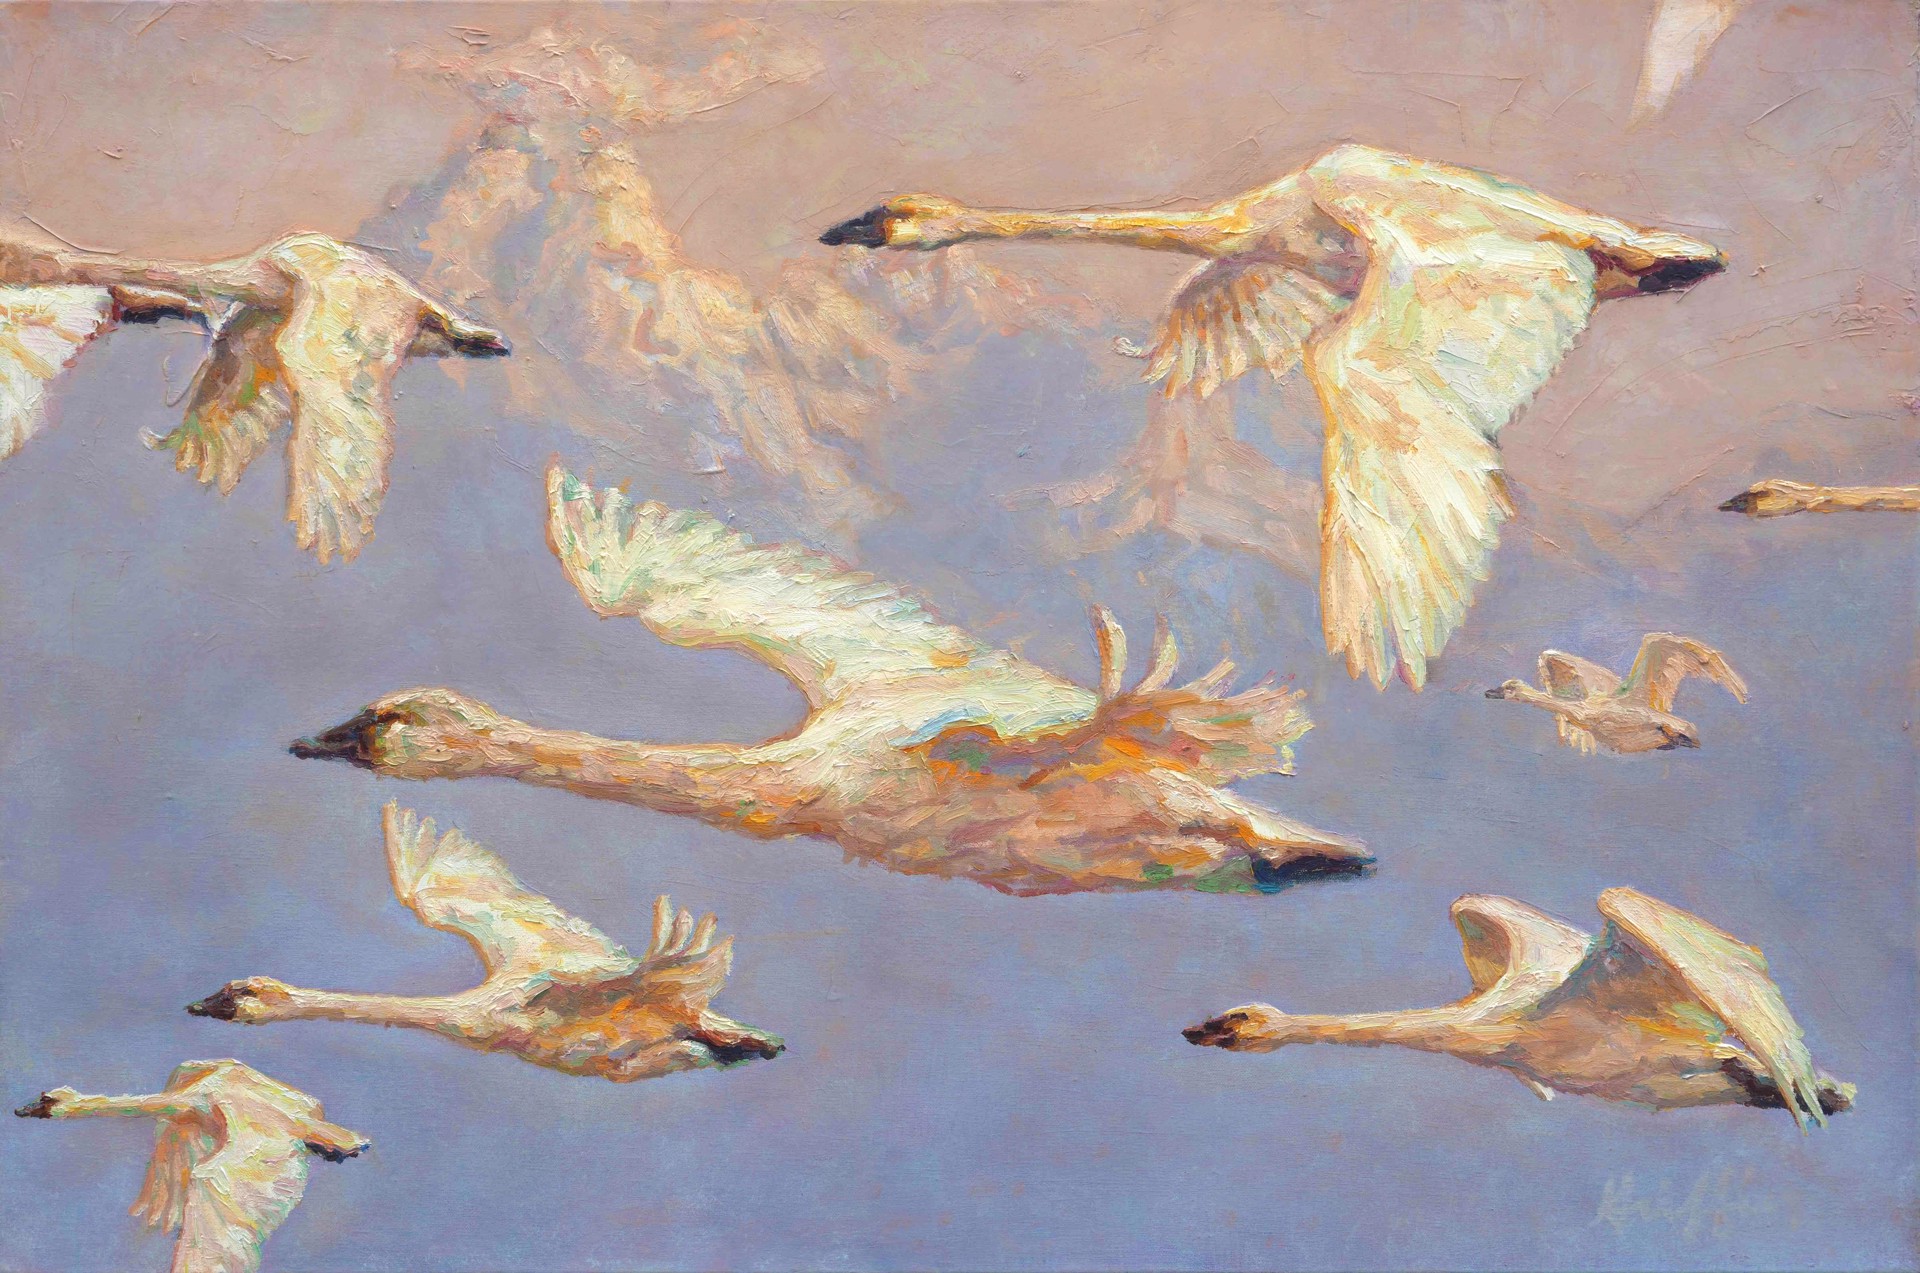 Original-Oil-Painting-By-Patricia-Griffin-In-A-Traditional-Graphic-Style-With-Swans-Flying-Over-The-Mountains-Painted-With-Lilac-And-Pink-And-White-Colors